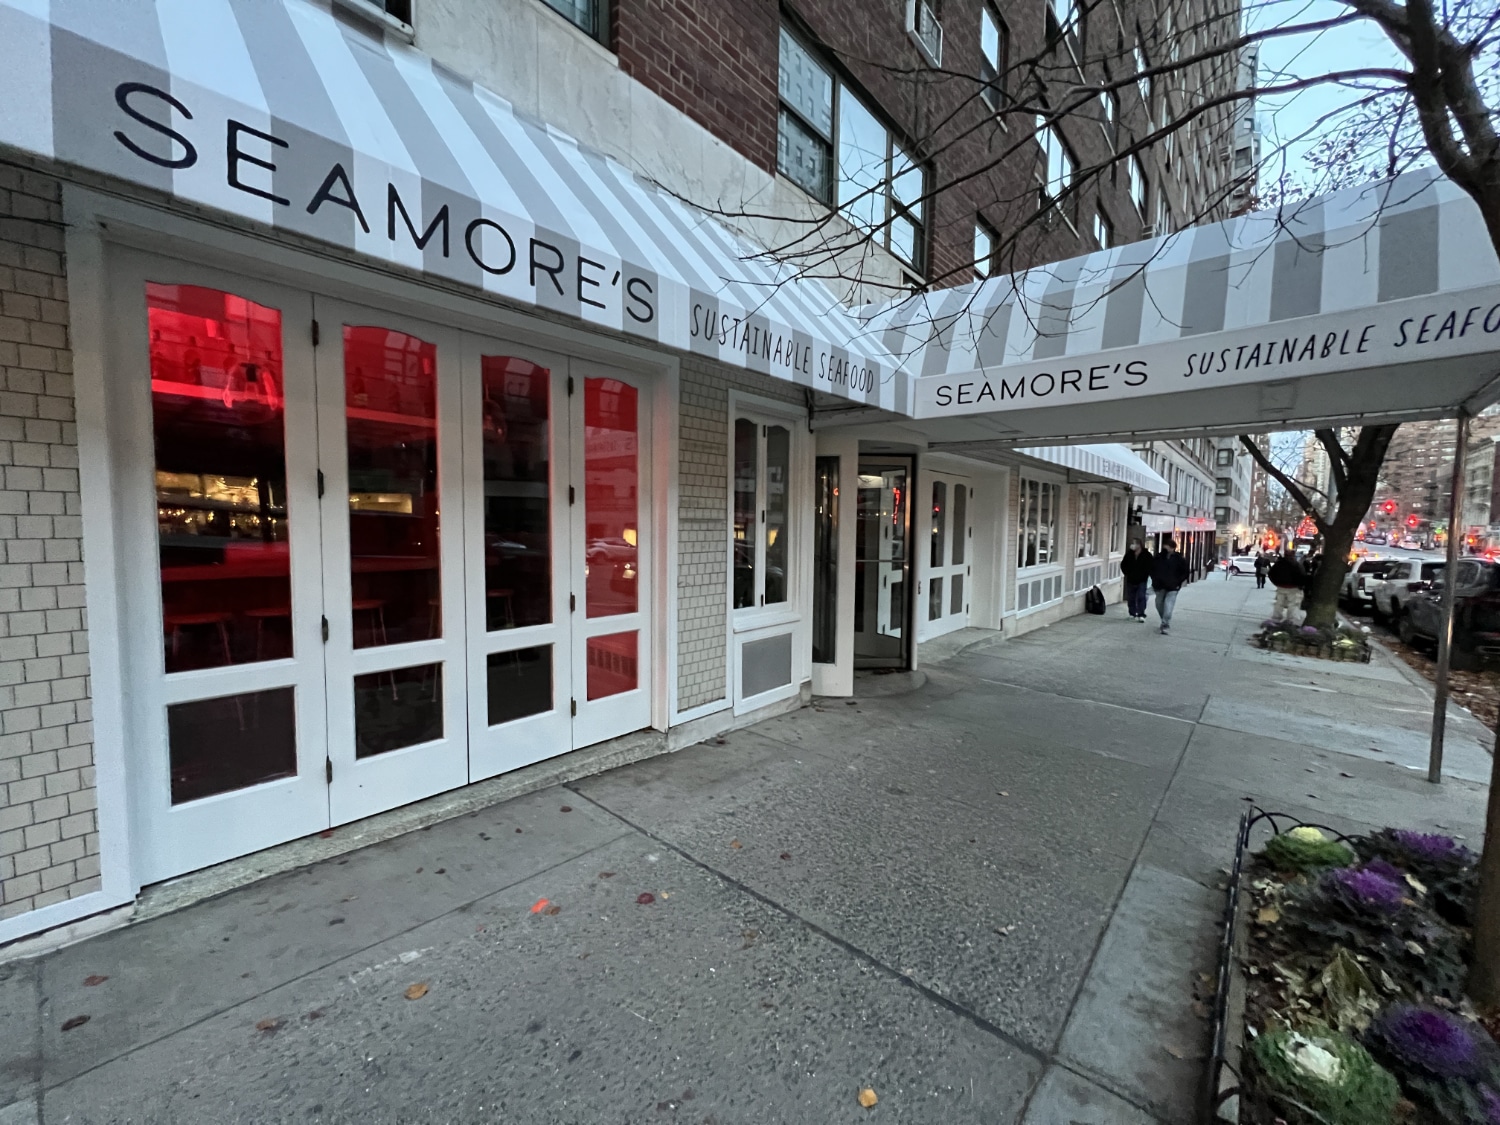 Seamore's UES sustainable seafood restaurant opens December 30th for a soft launch/Upper East Site